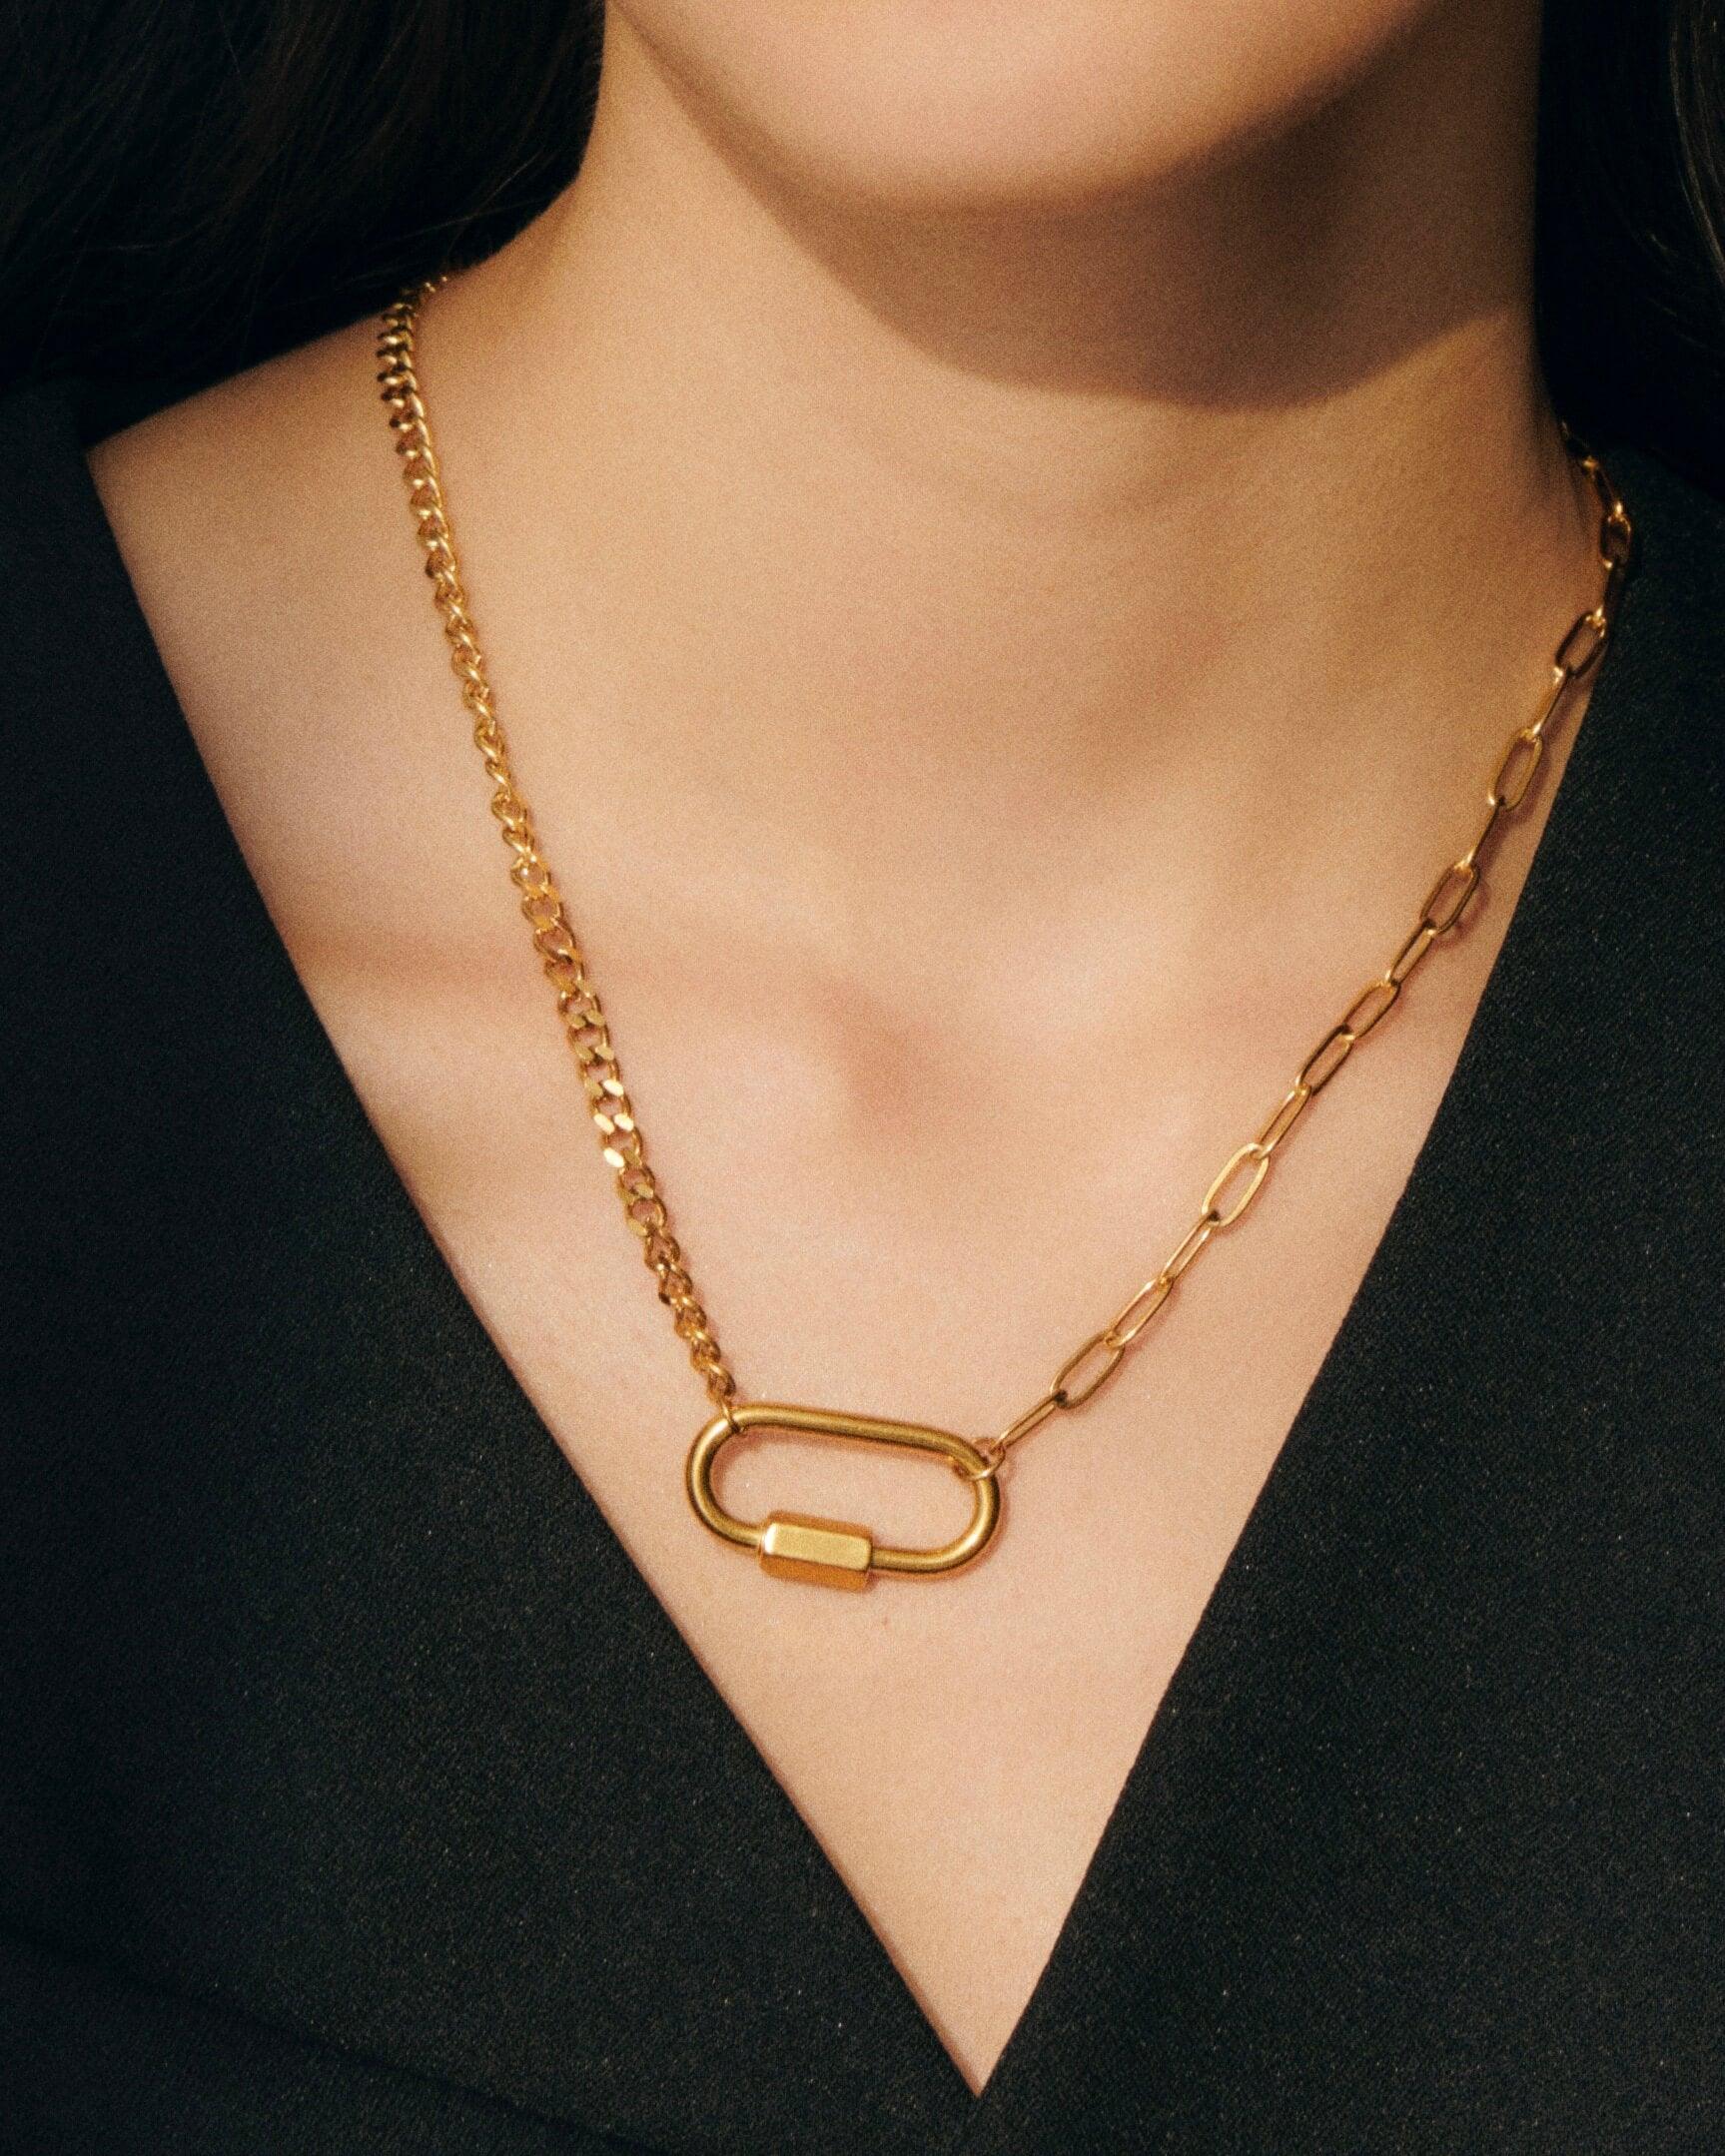 TRI-CHAIN LINK NECKLACE - LIMELY